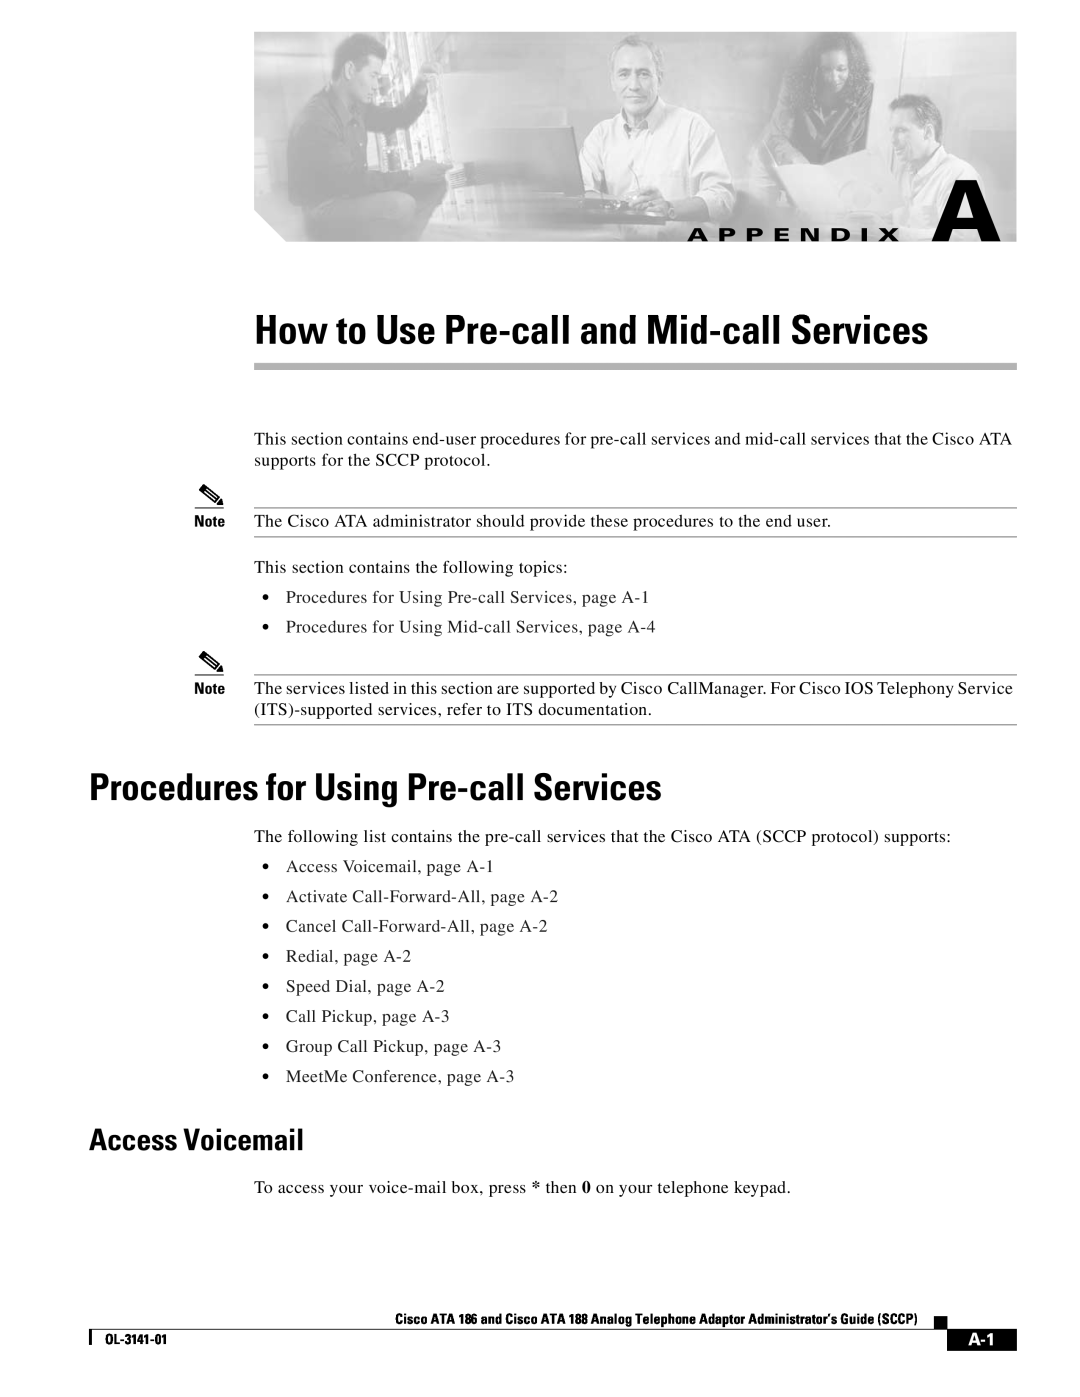 Cisco Systems ATA 188 How to Use Pre-call and Mid-call Services, Procedures for Using Pre-call Services, Access Voicemail 